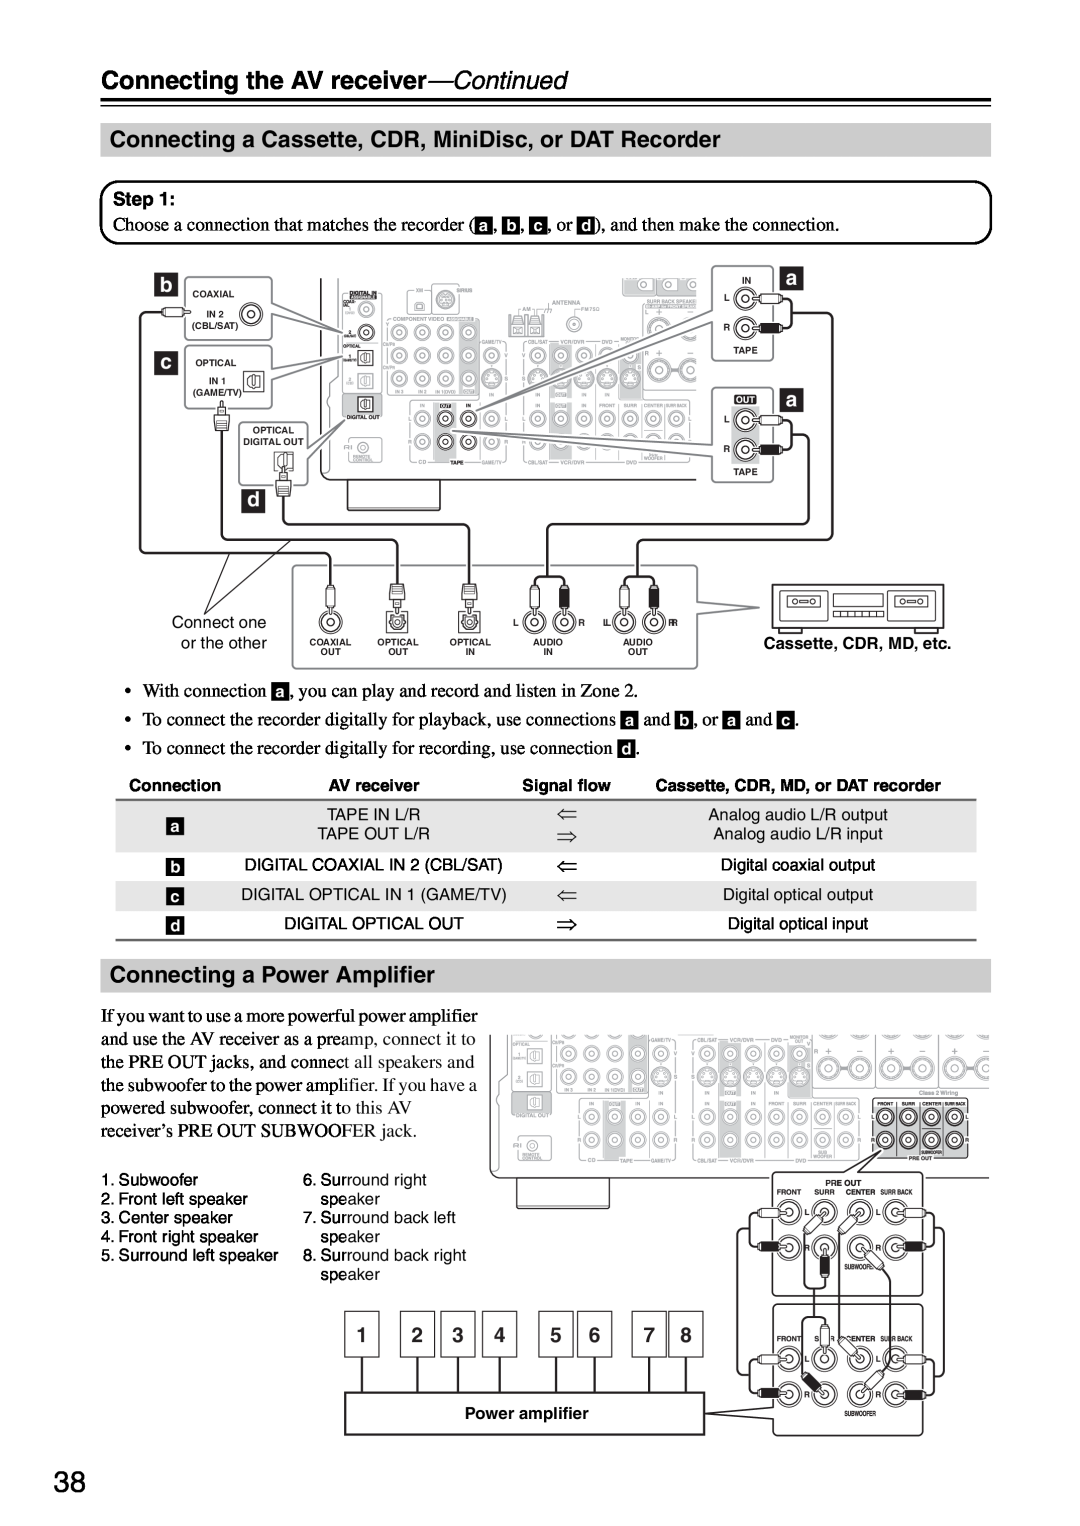 Integra DTR-5.8 instruction manual Connecting a Power Amplifier, Connecting the AV receiver—Continued 